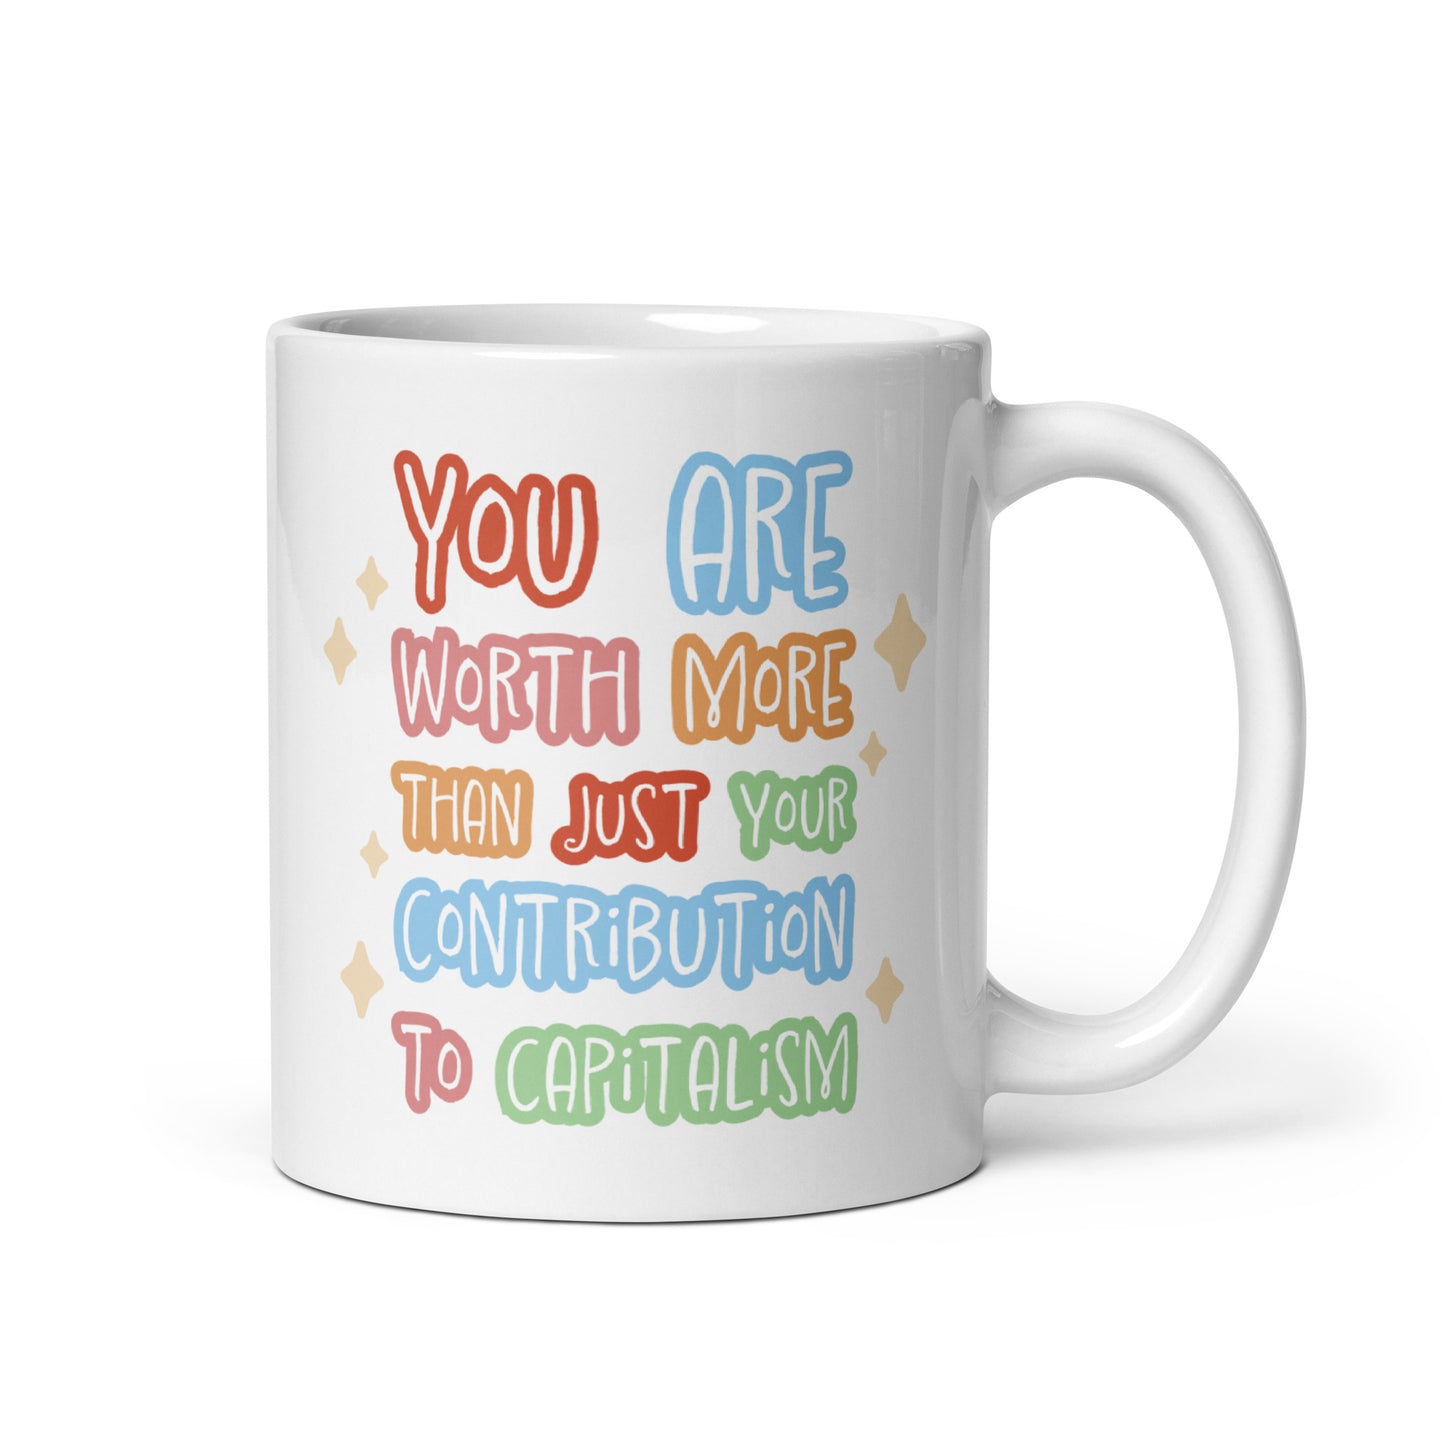 A white ceramic 11 ounce mug featuring colorful hand-written-style text that reads "You are worth more than just your contribution to capitalism". Sparkles surround the text on each side.